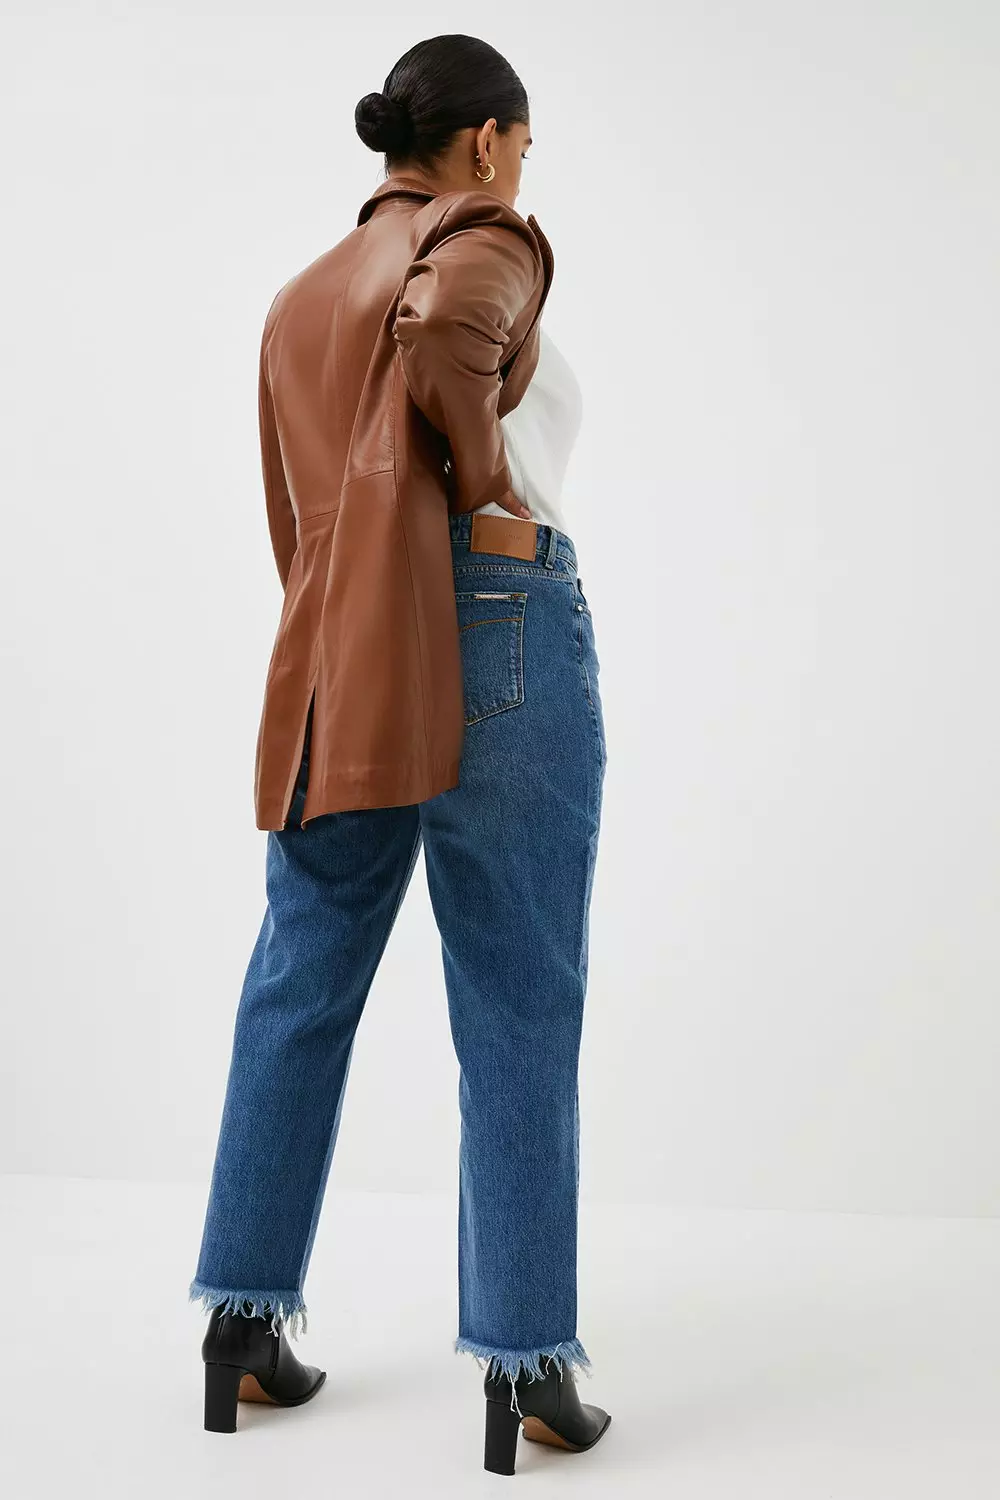 Plus Size Ripped High Waisted Straight Leg Jeans